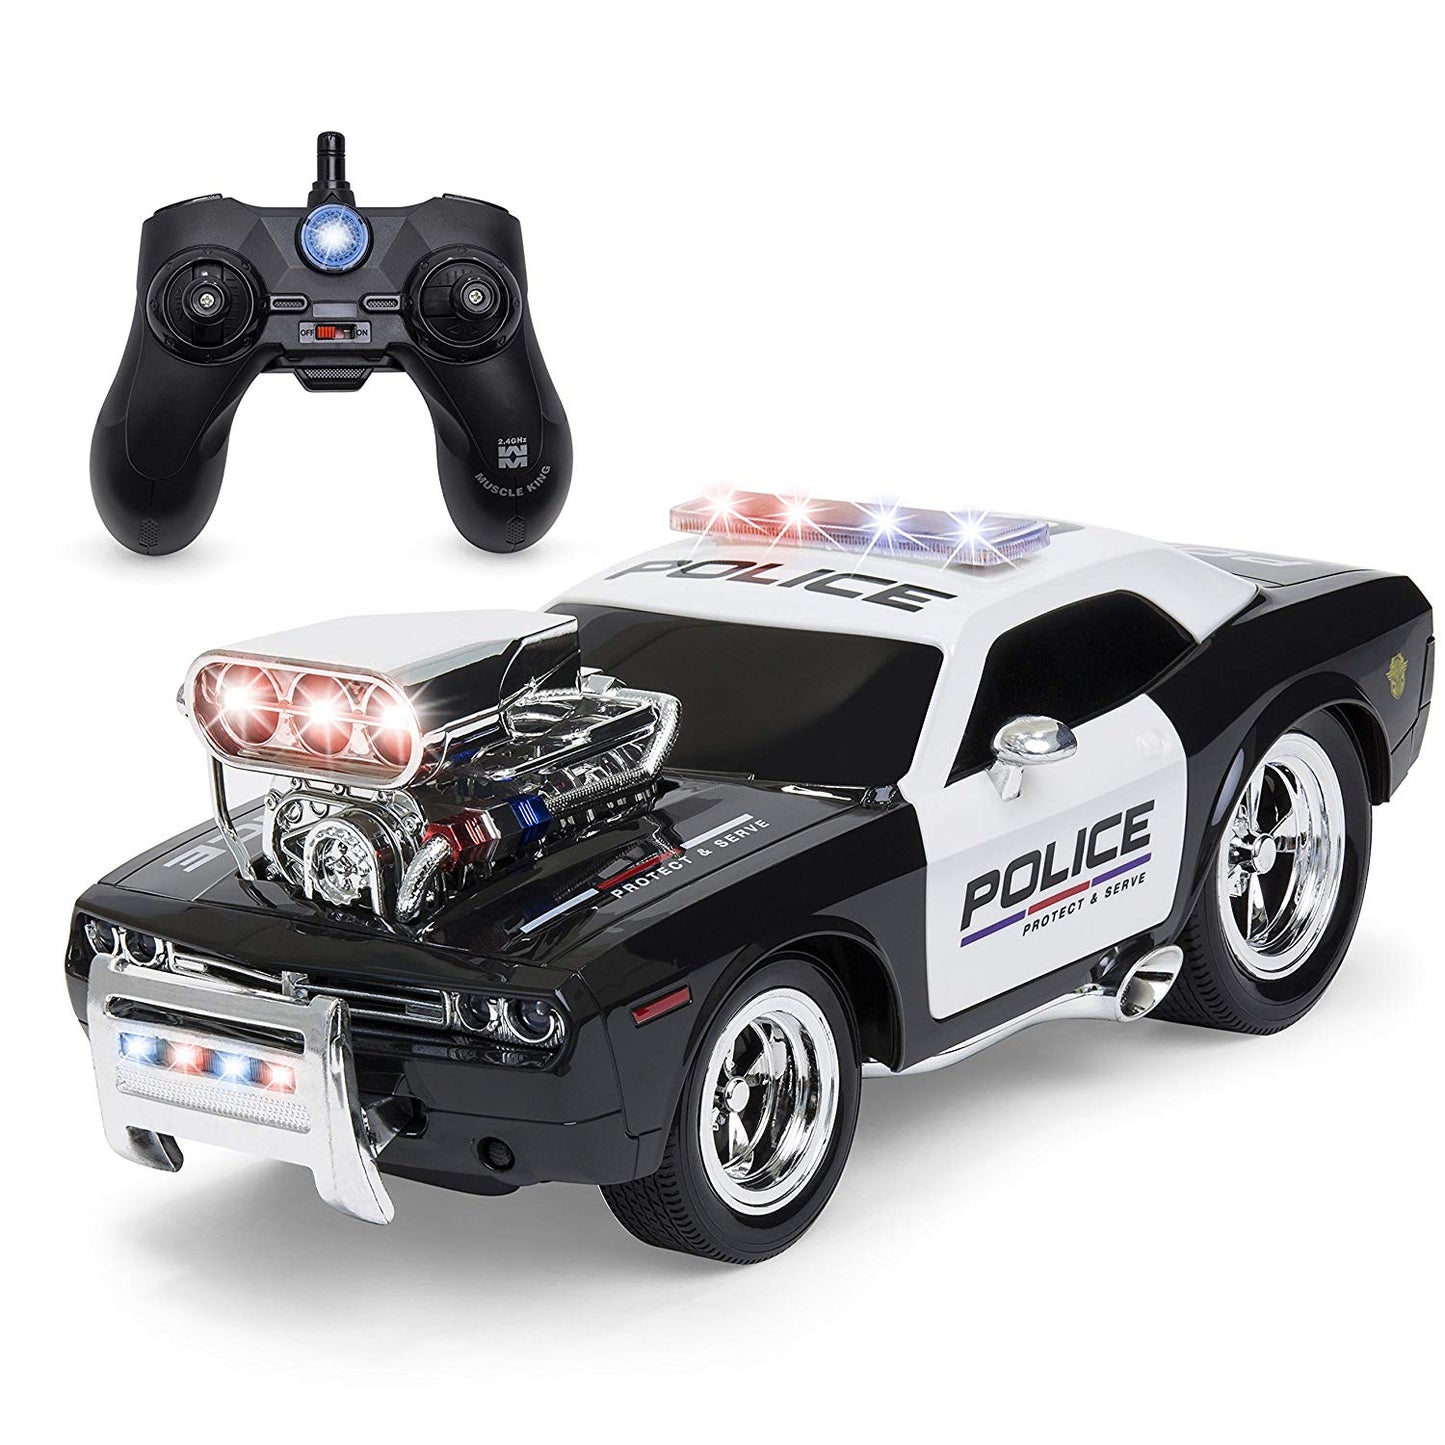 2.4GHz Remote Control Police Car w/ Lights, Rechargeable Batteries, USB Cable - Black